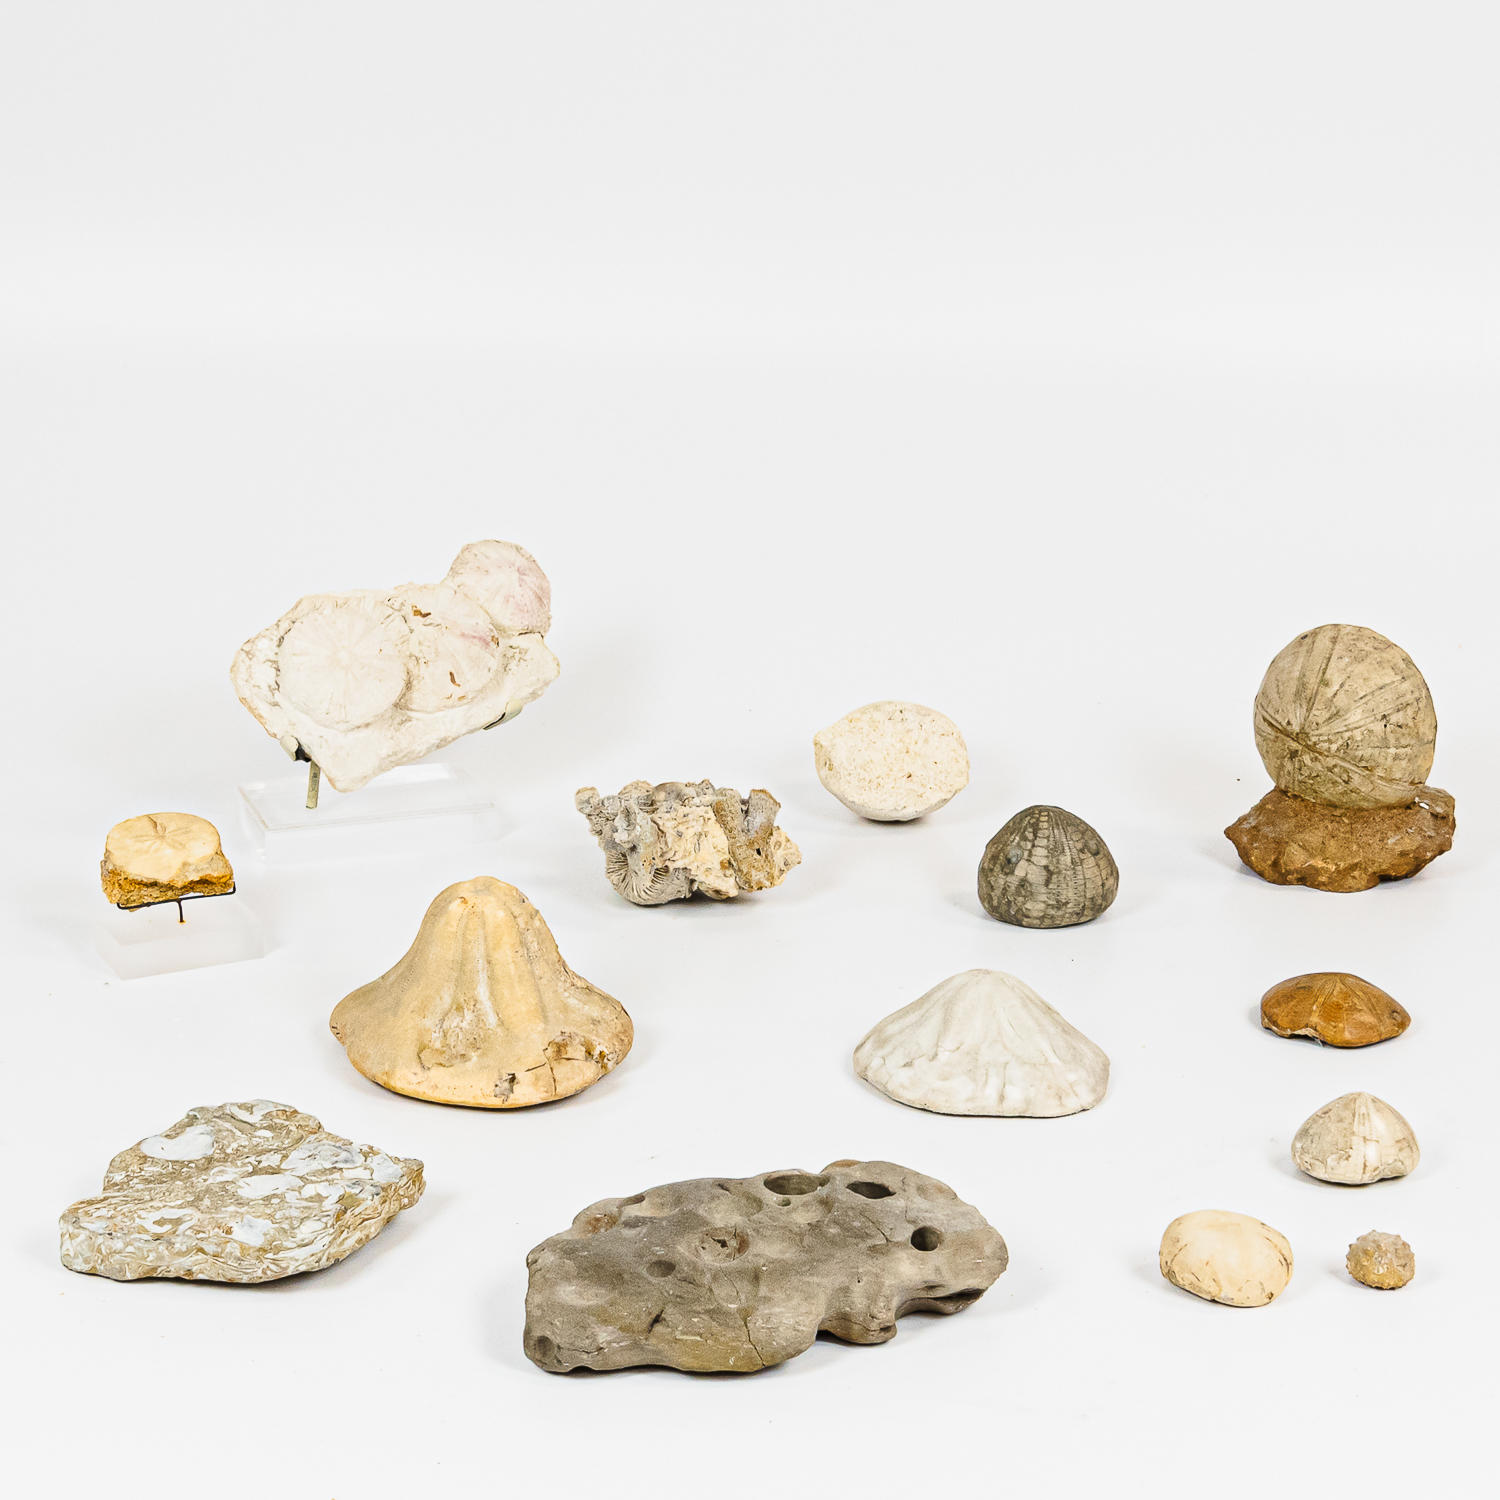 COLLECTION OF FOSSILIZED SHELLS 3ae767